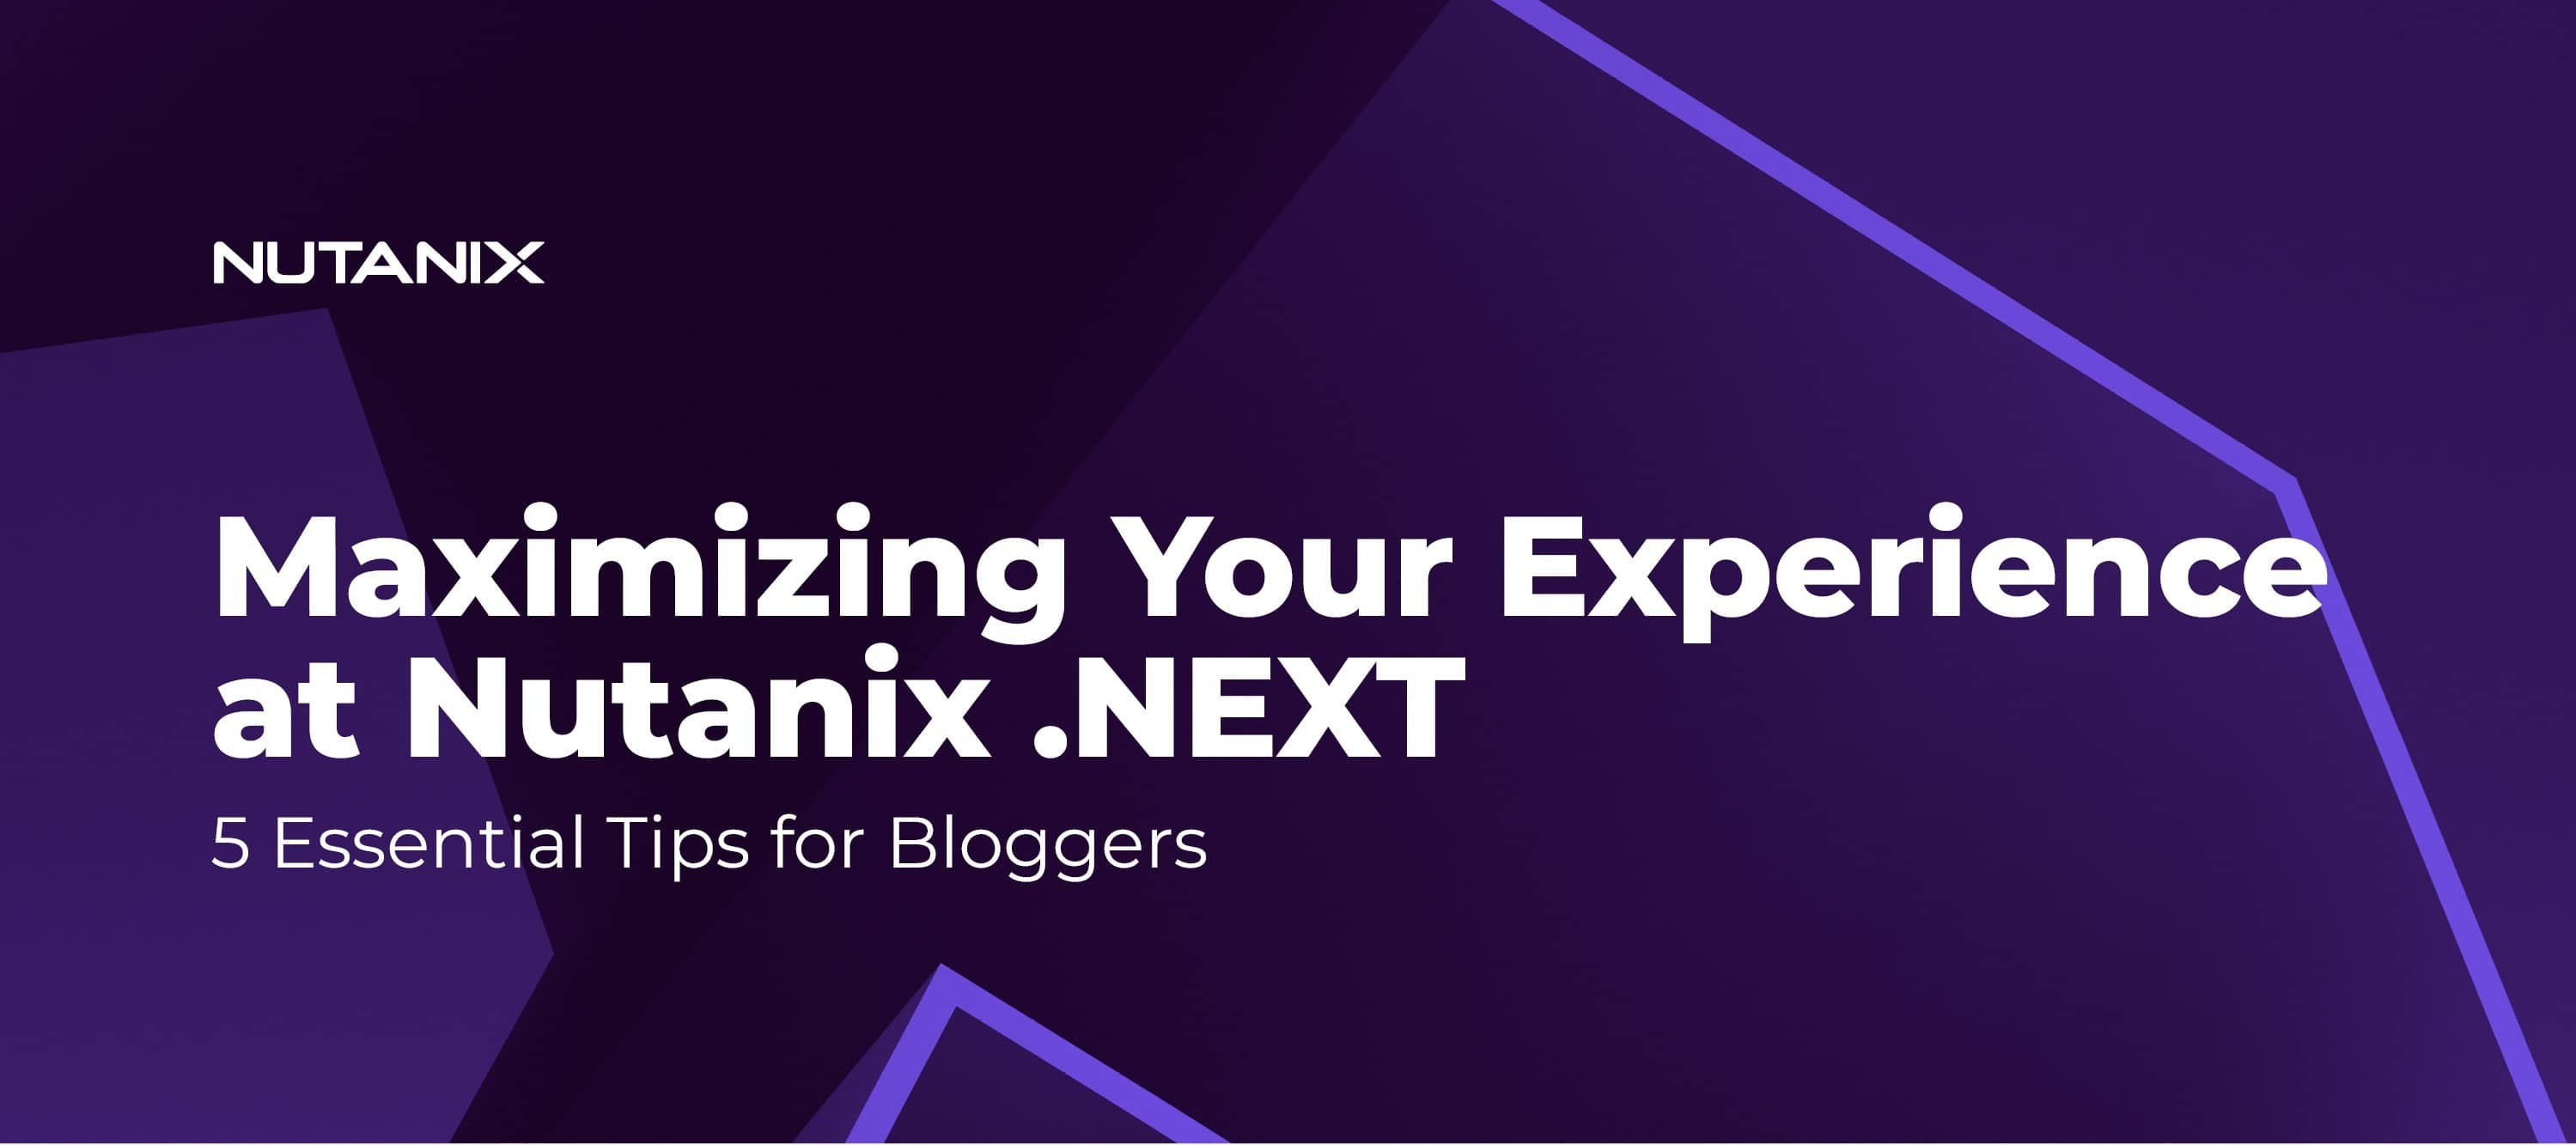 5 Essential Tips for Maximizing Your Experience at Nutanix .NEXT for Bloggers